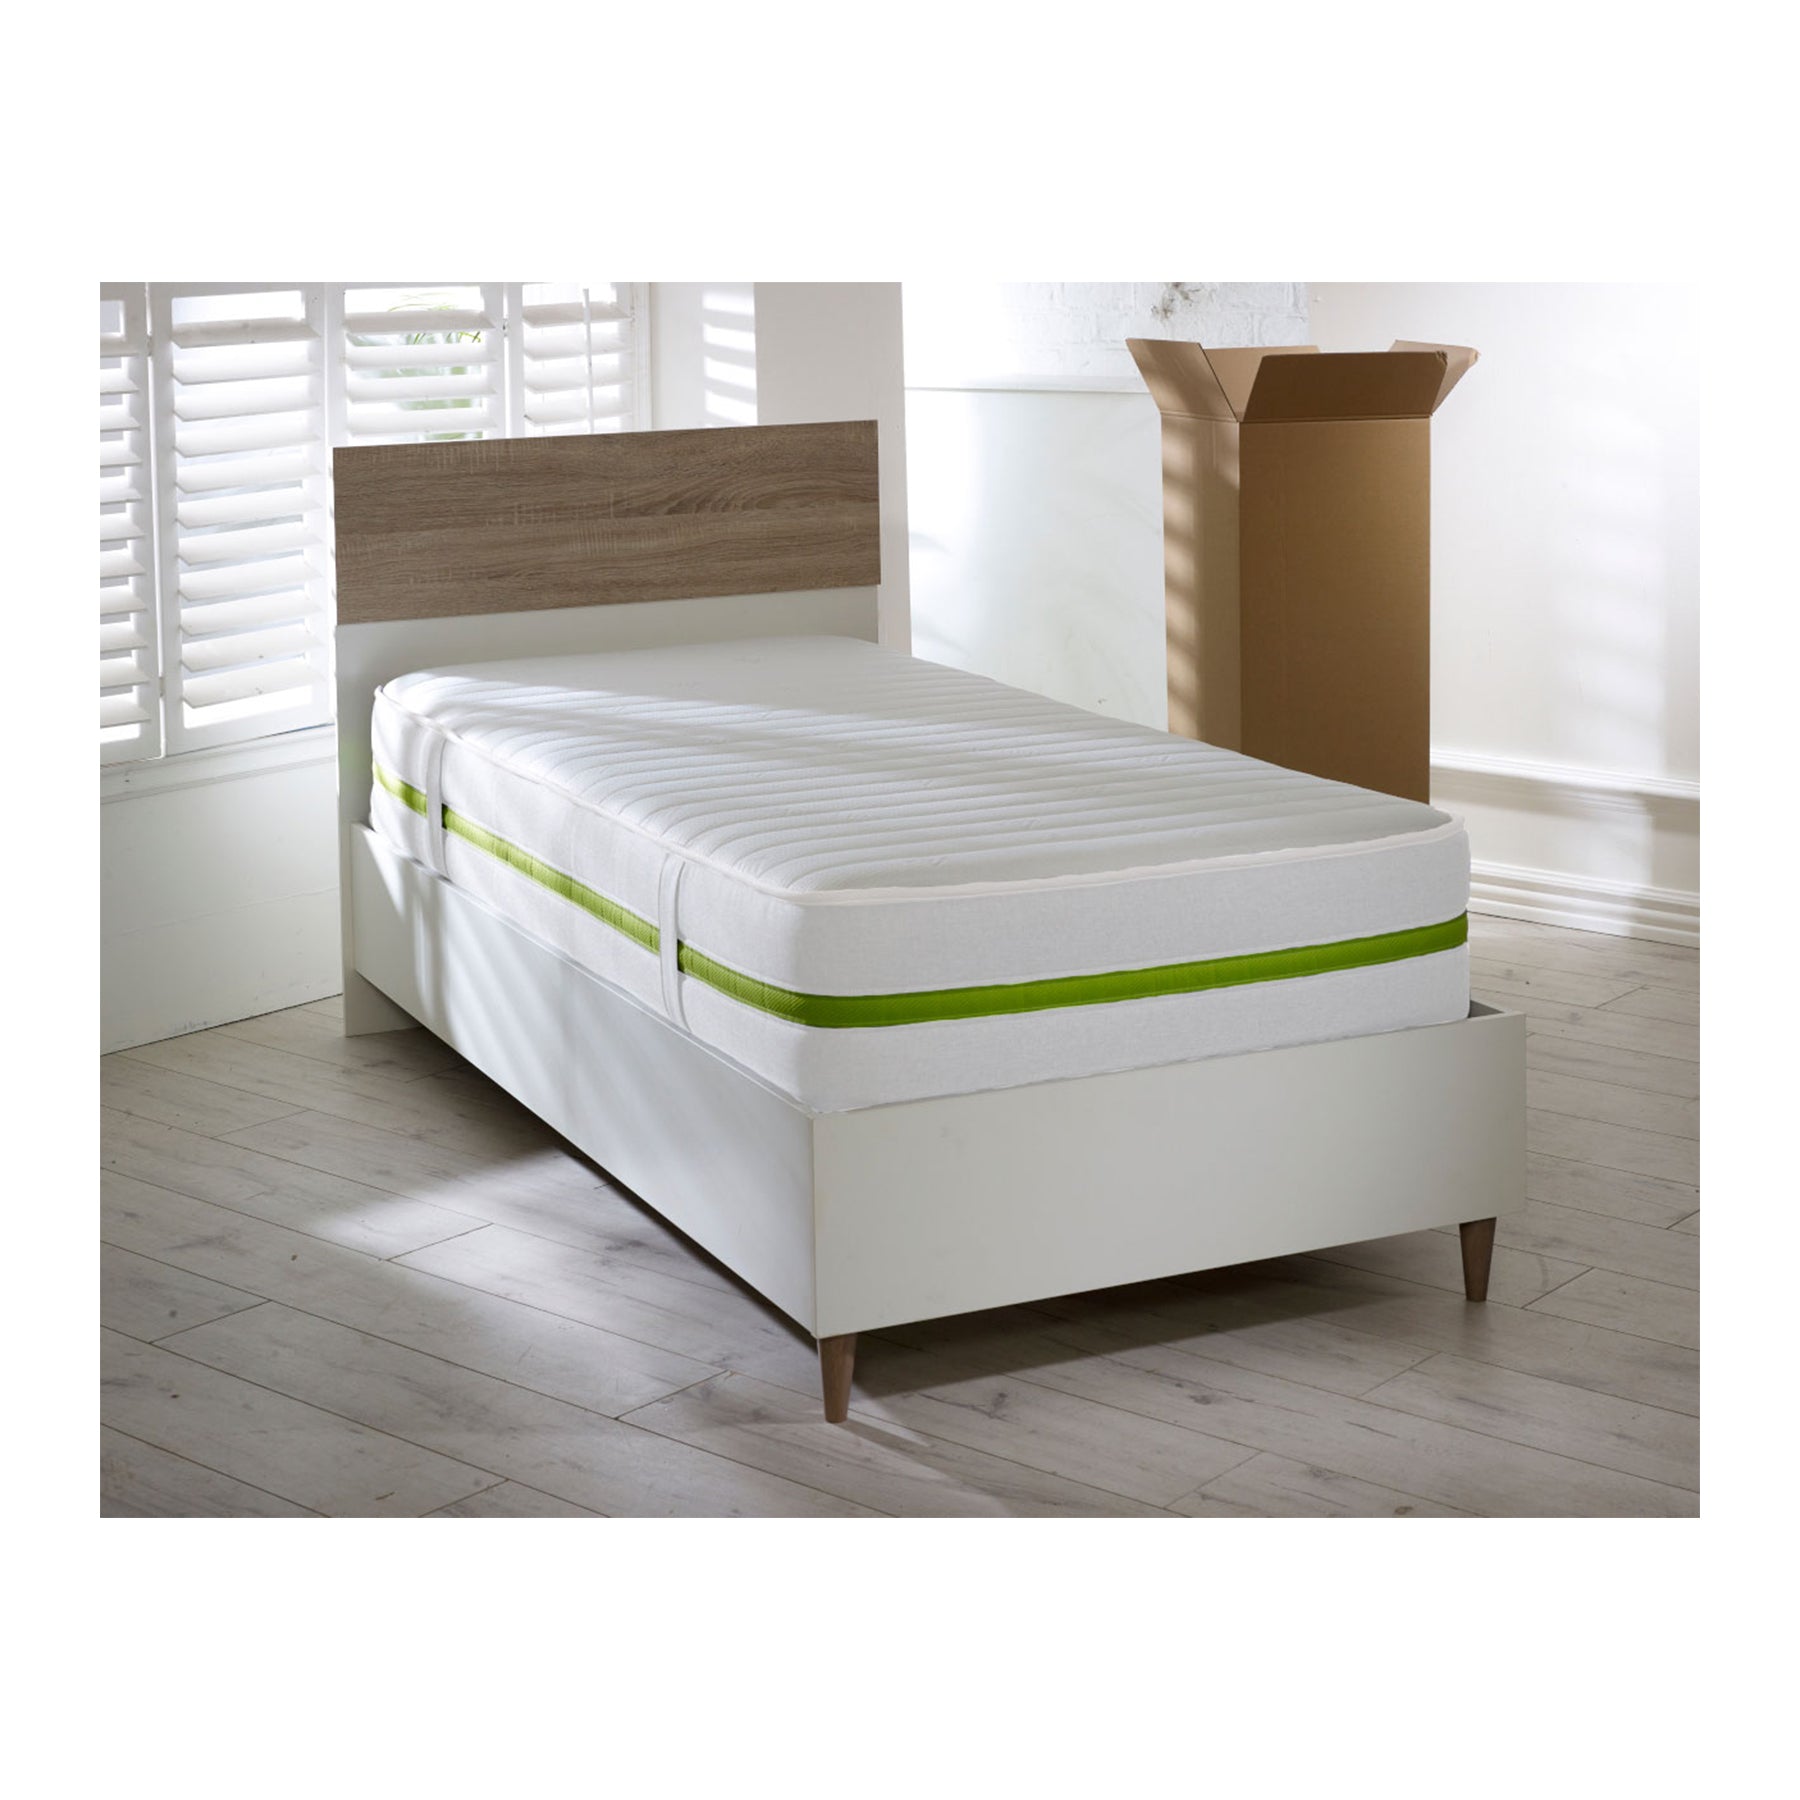 Starlight Beds 20cm Deep White and Green Border Quilted Memory foam and Open Coil Spring Mattress